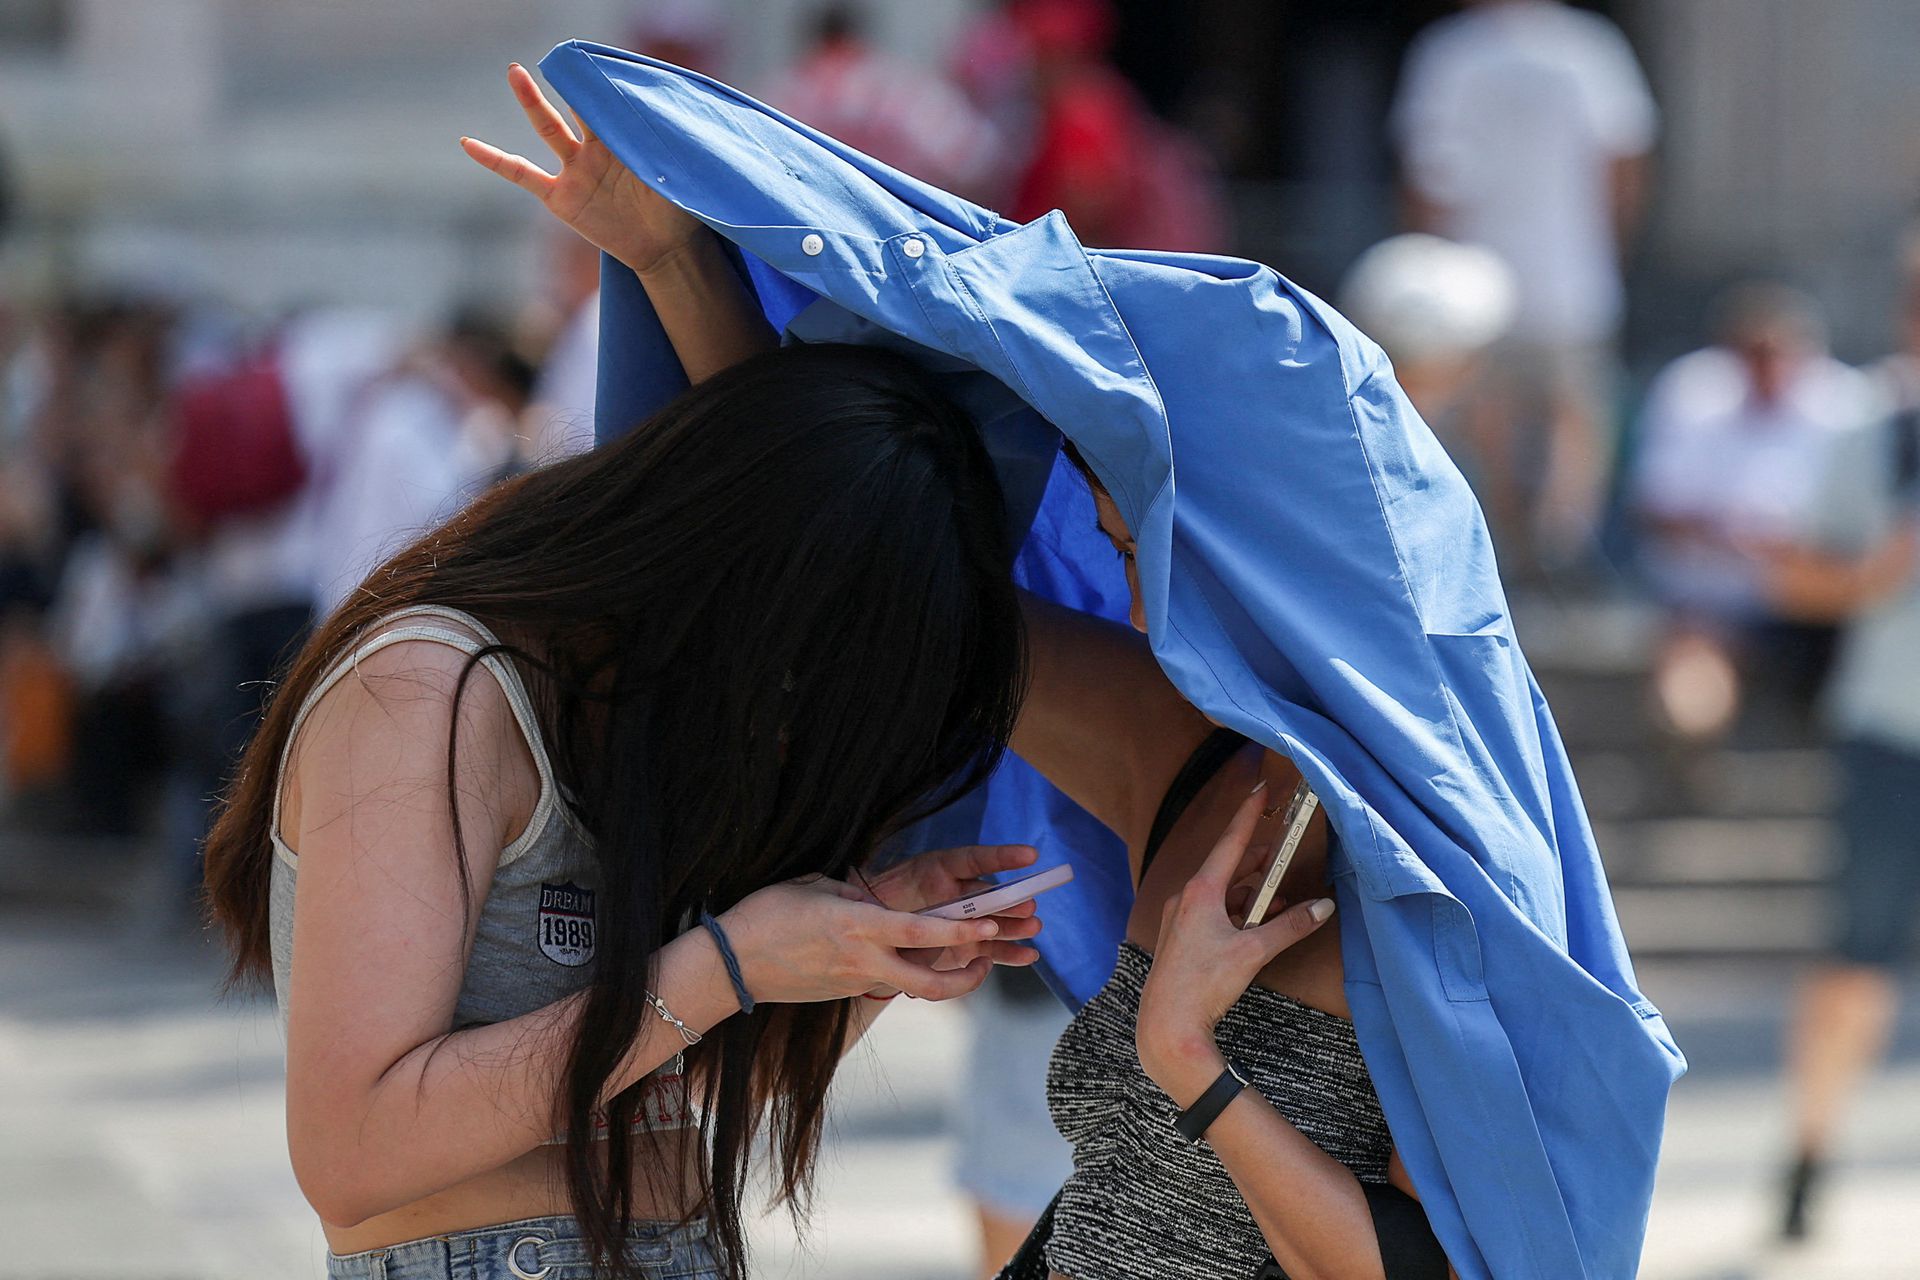 Heatwave sweeps Milan: record high temperature of 33°C shatters previous records dating back to 1763 